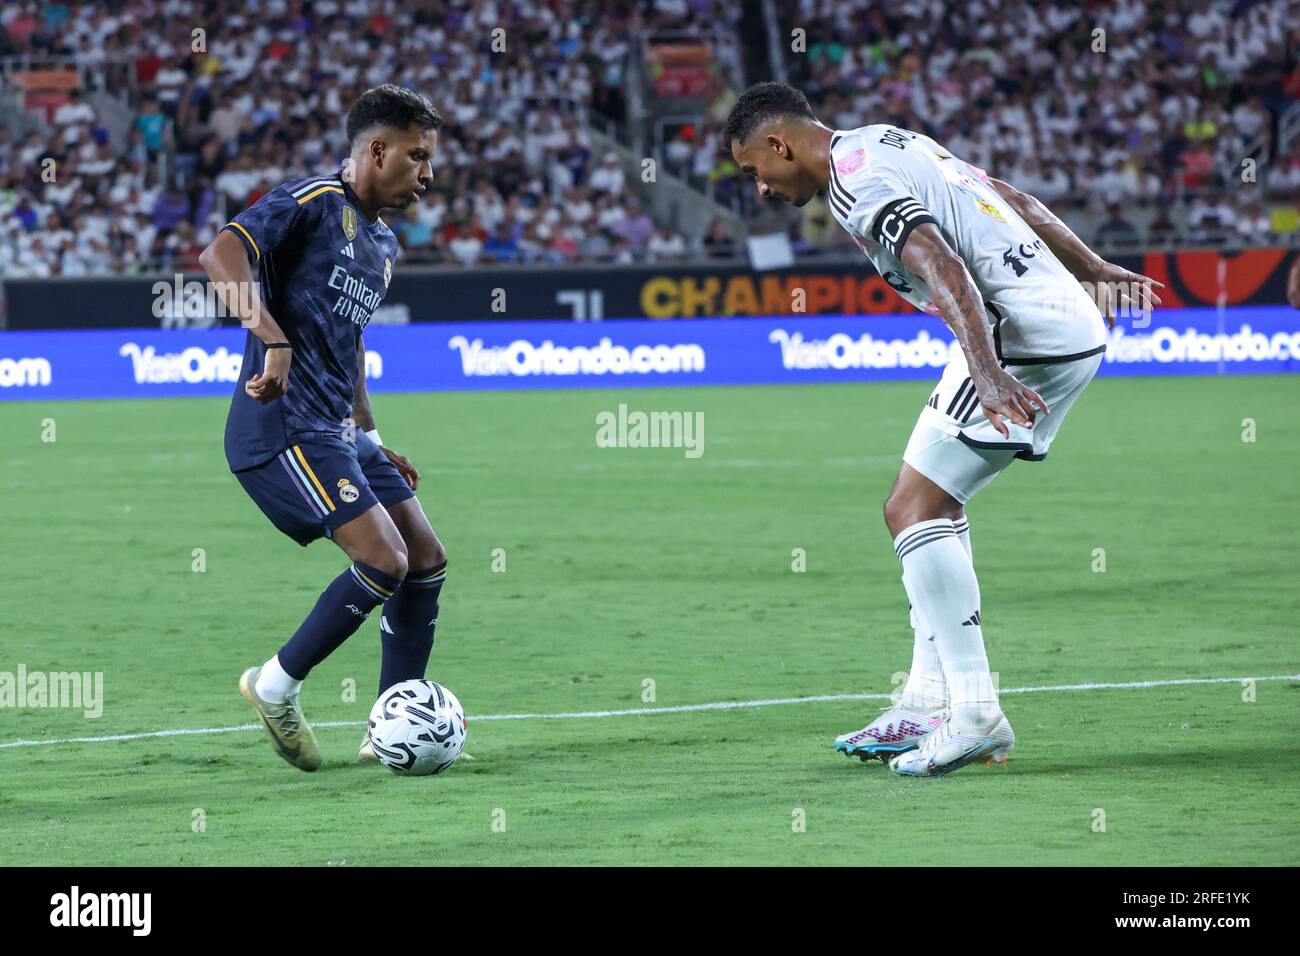 United States this Wednesday, August 2nd. Rodrigo of Juventus and Danilo of Real Madrid, International friendly match at Camping World Stadium in the city of Orlando in the United States this Wednesday, August 2nd. Credit: Brazil Photo Press/Alamy Live News Stock Photo